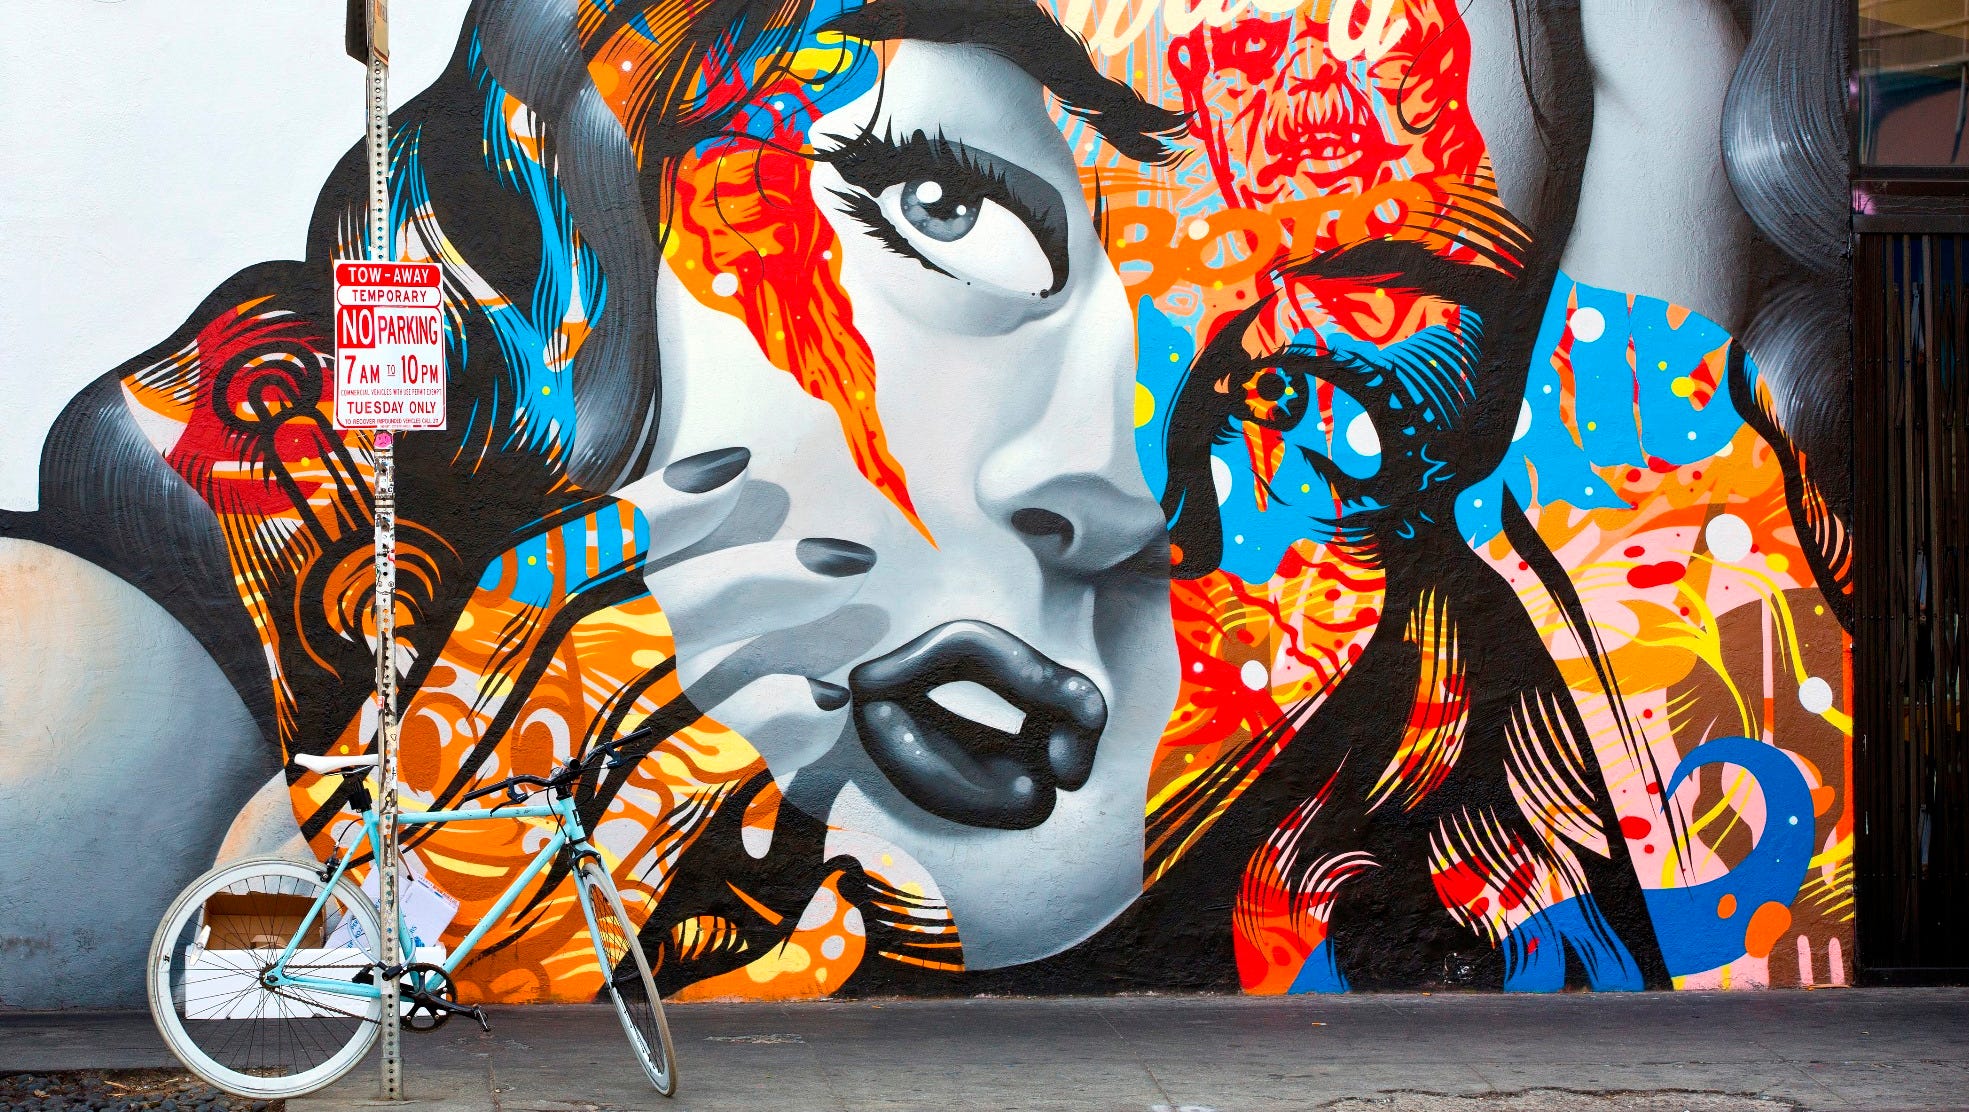 10Best: Cities to see street art